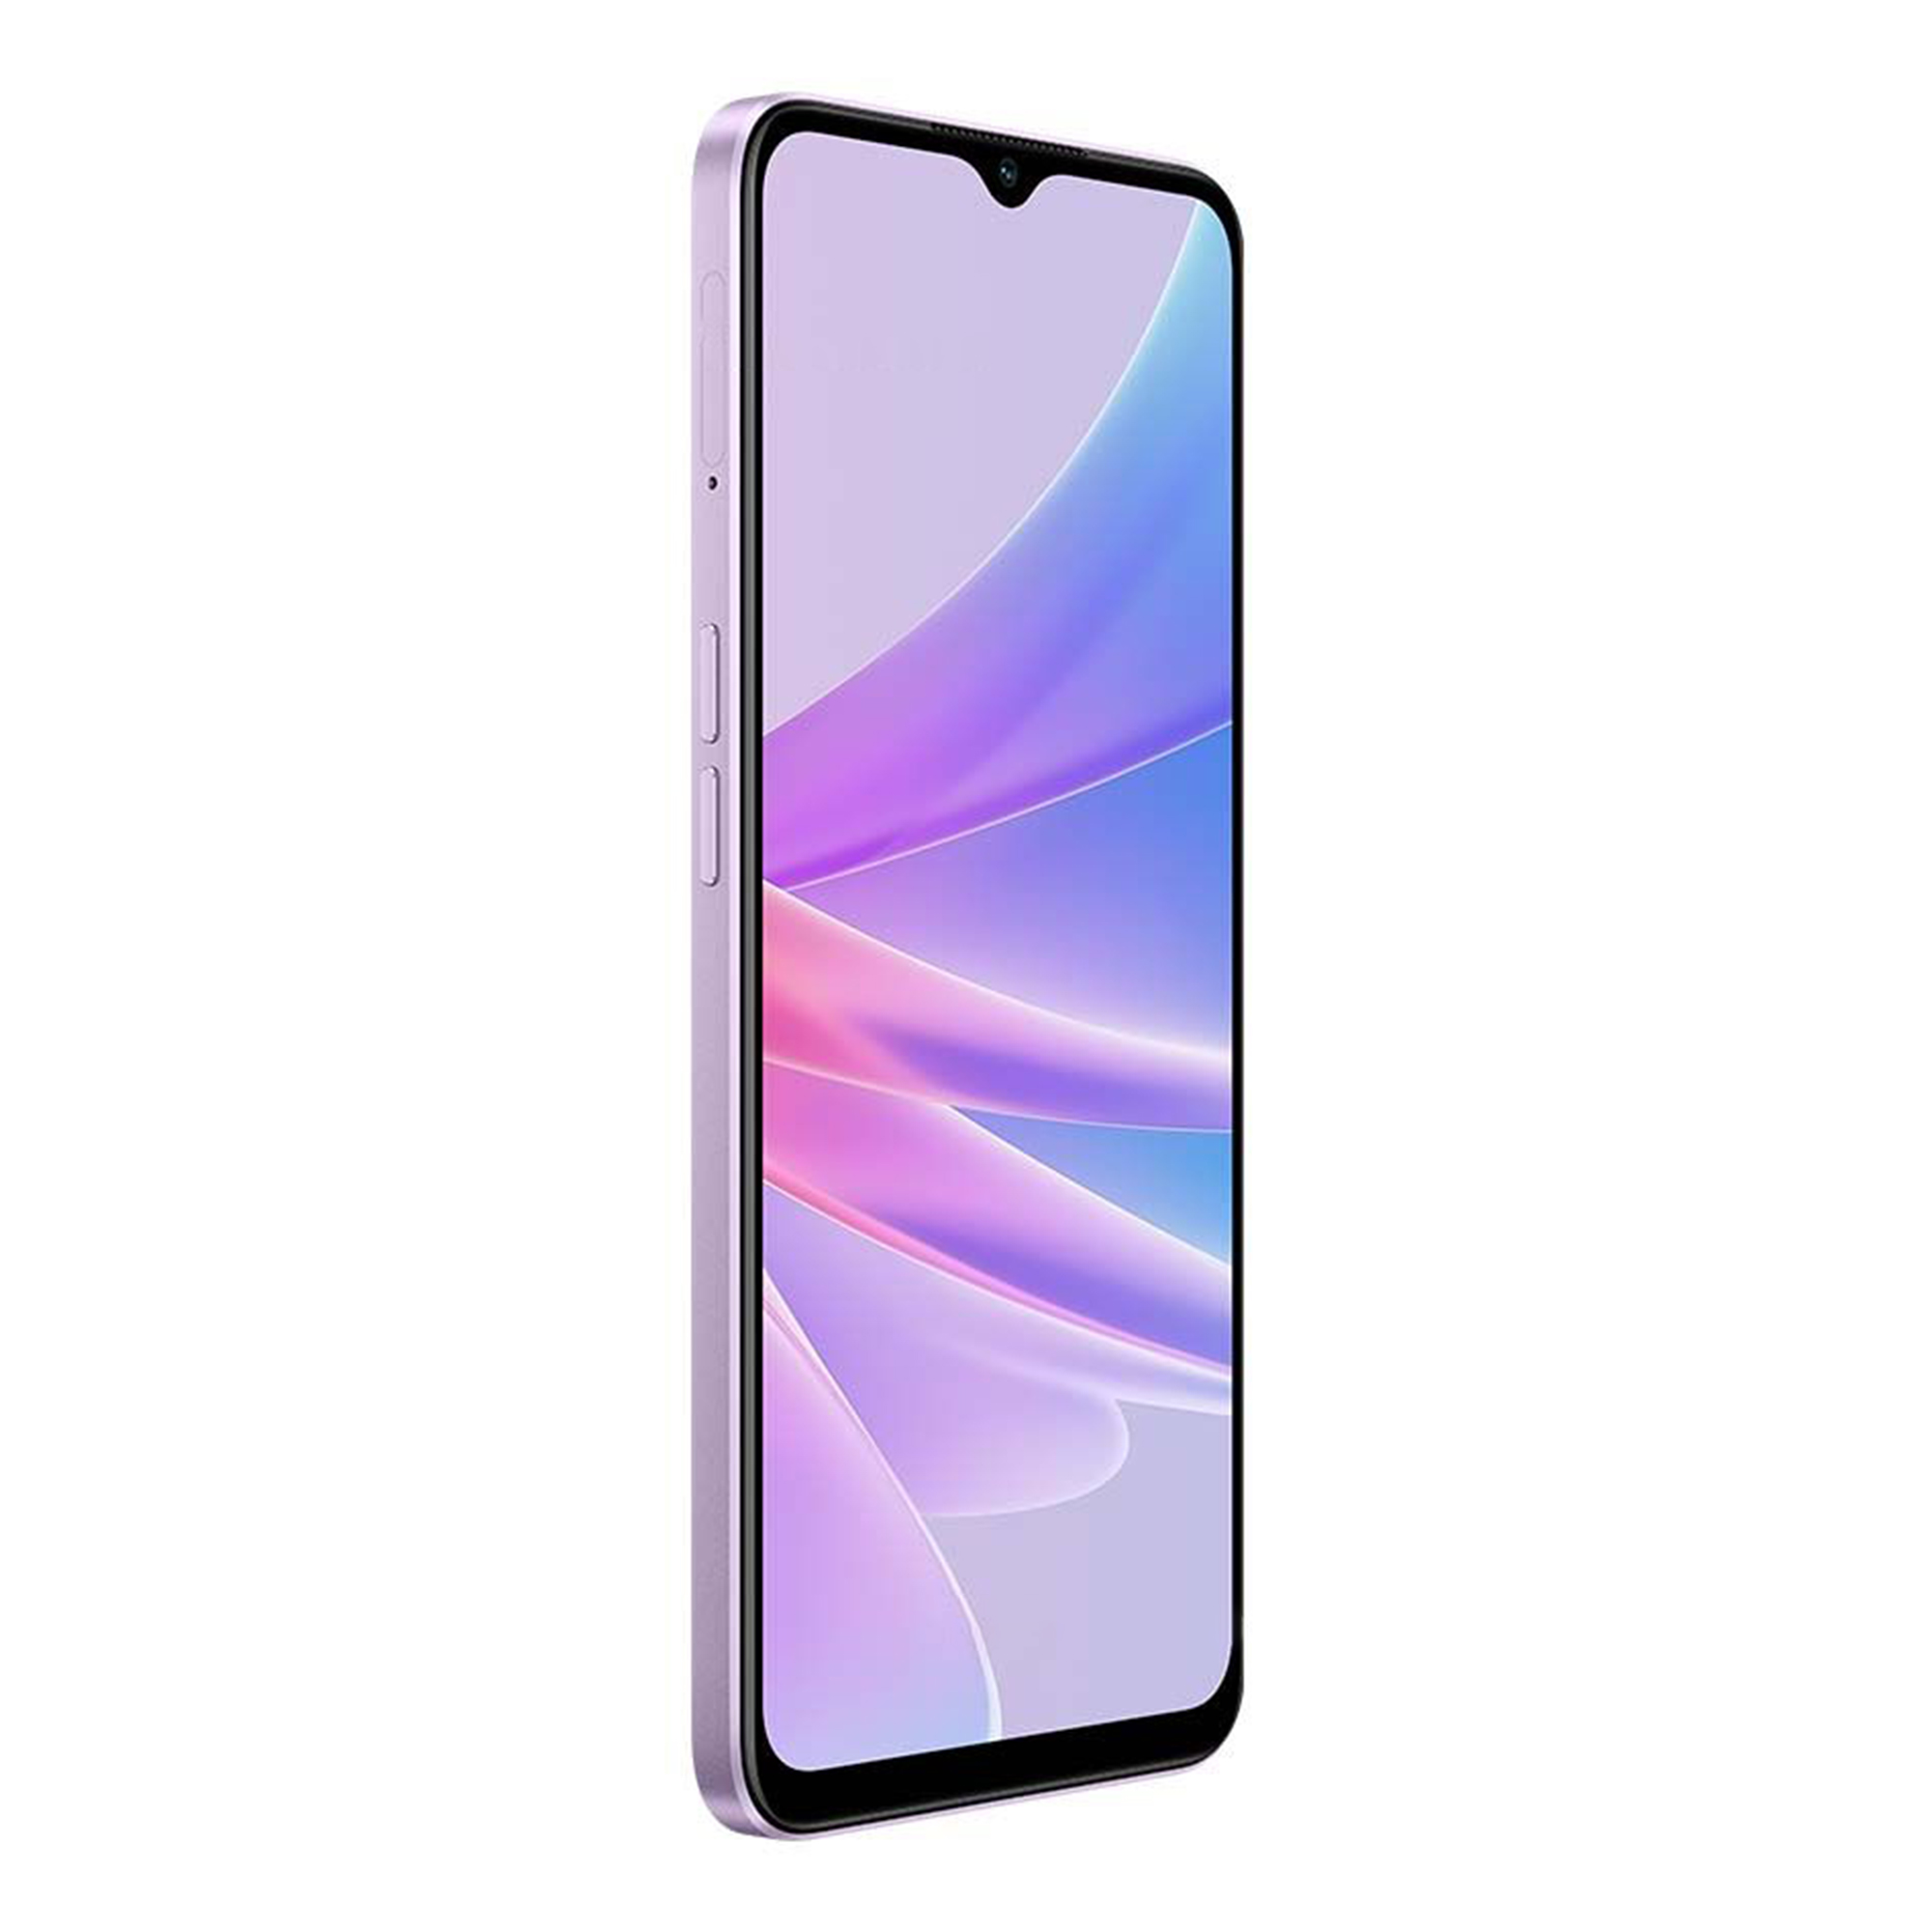 OPPO A78 5G (NEW) – Factory Mobile Mall